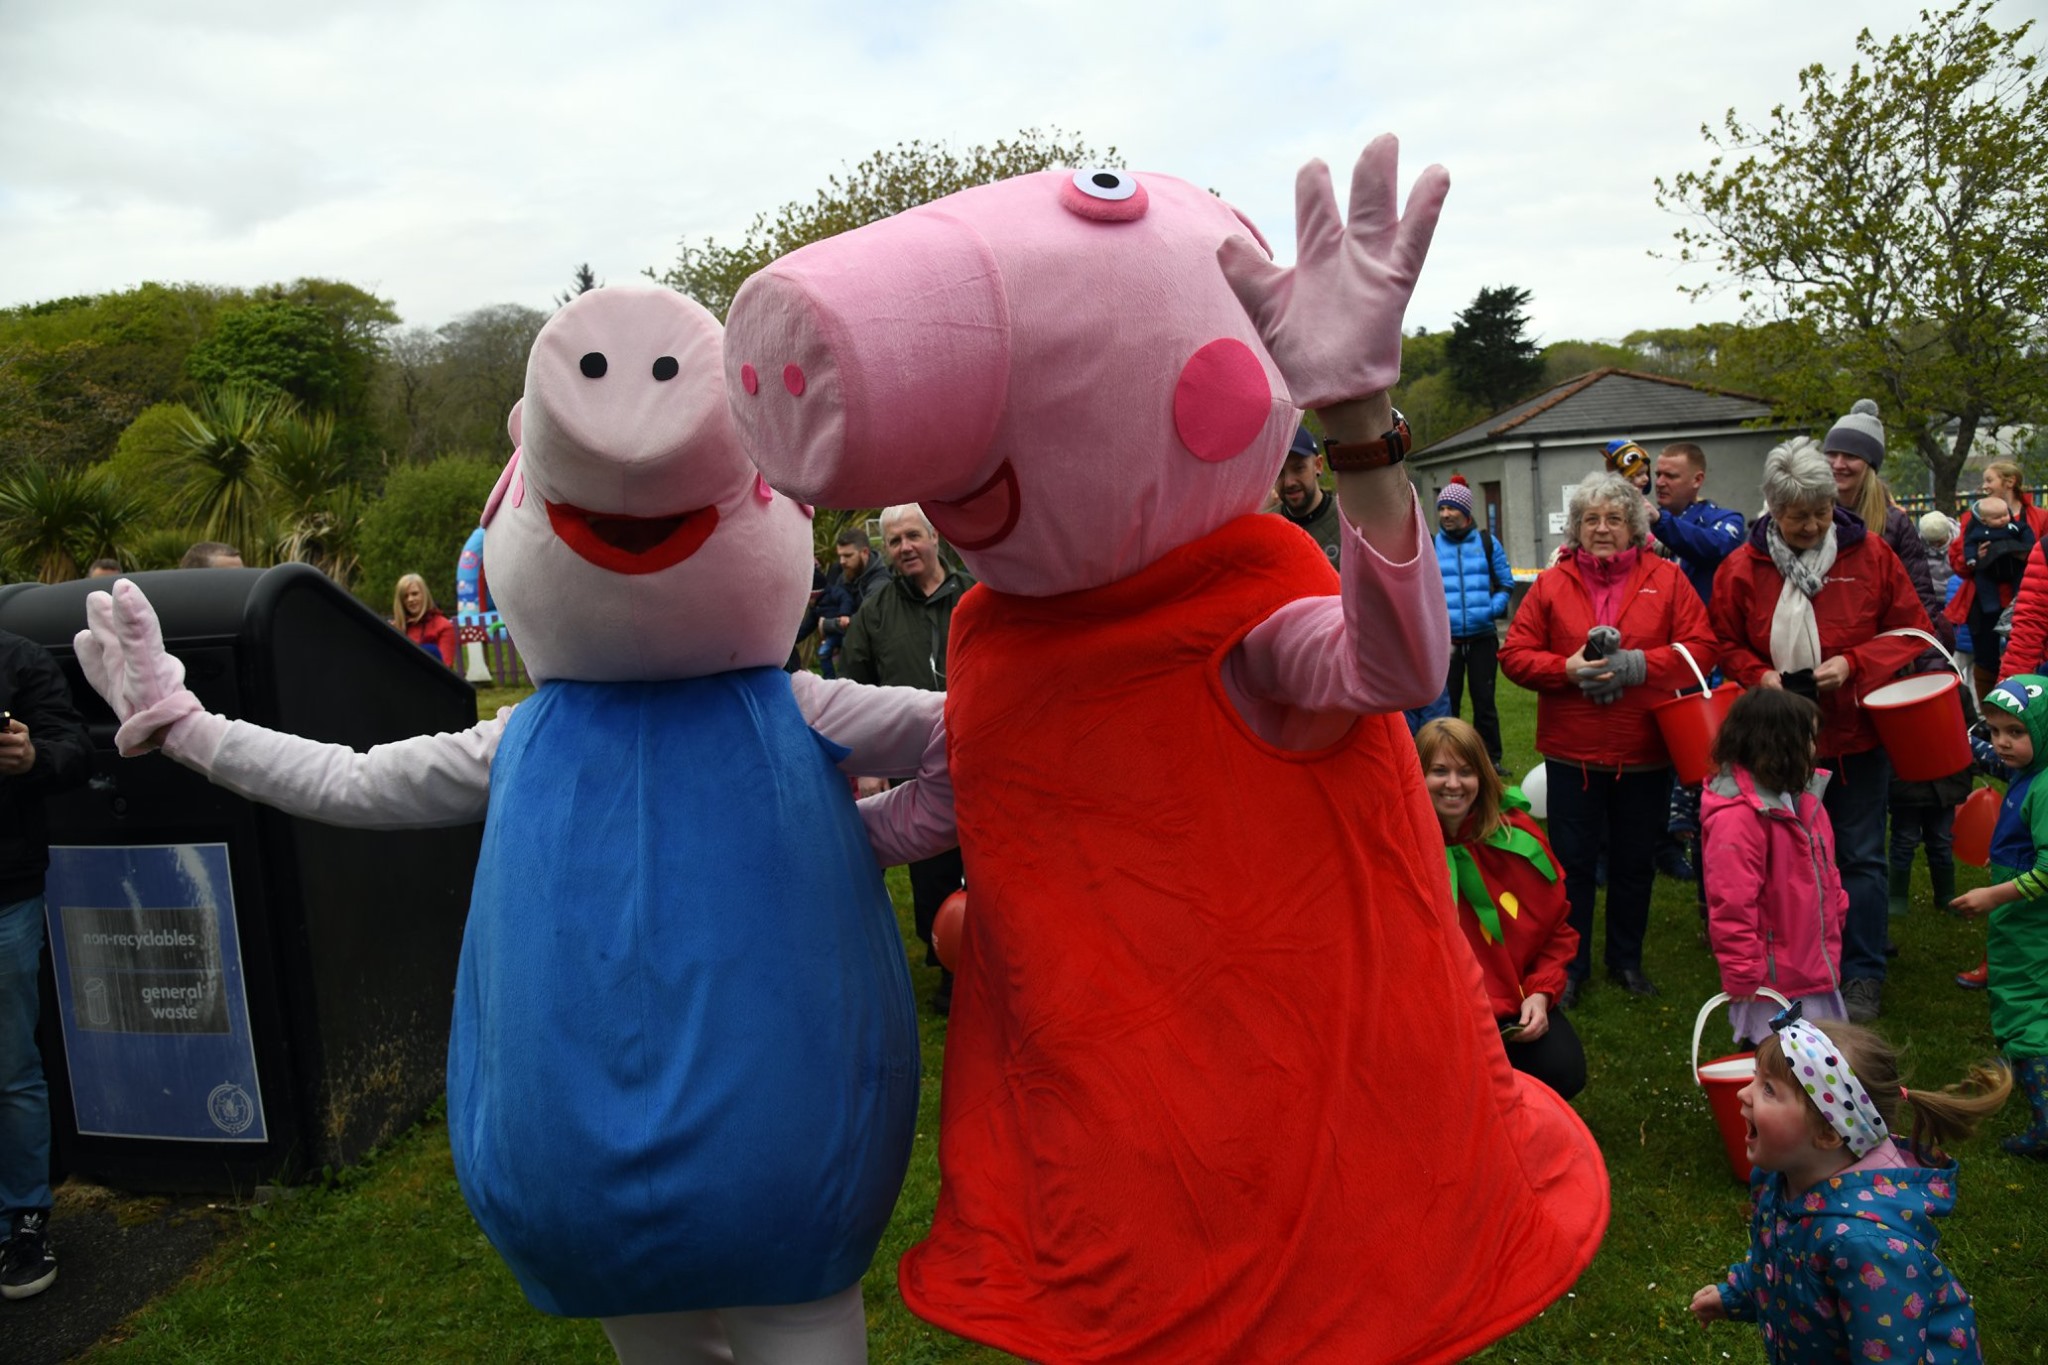 More than 100 enthusiastic Peppa Pig fans were taken on an adventure through the streets of Stornoway to aid the Save the Children charity.